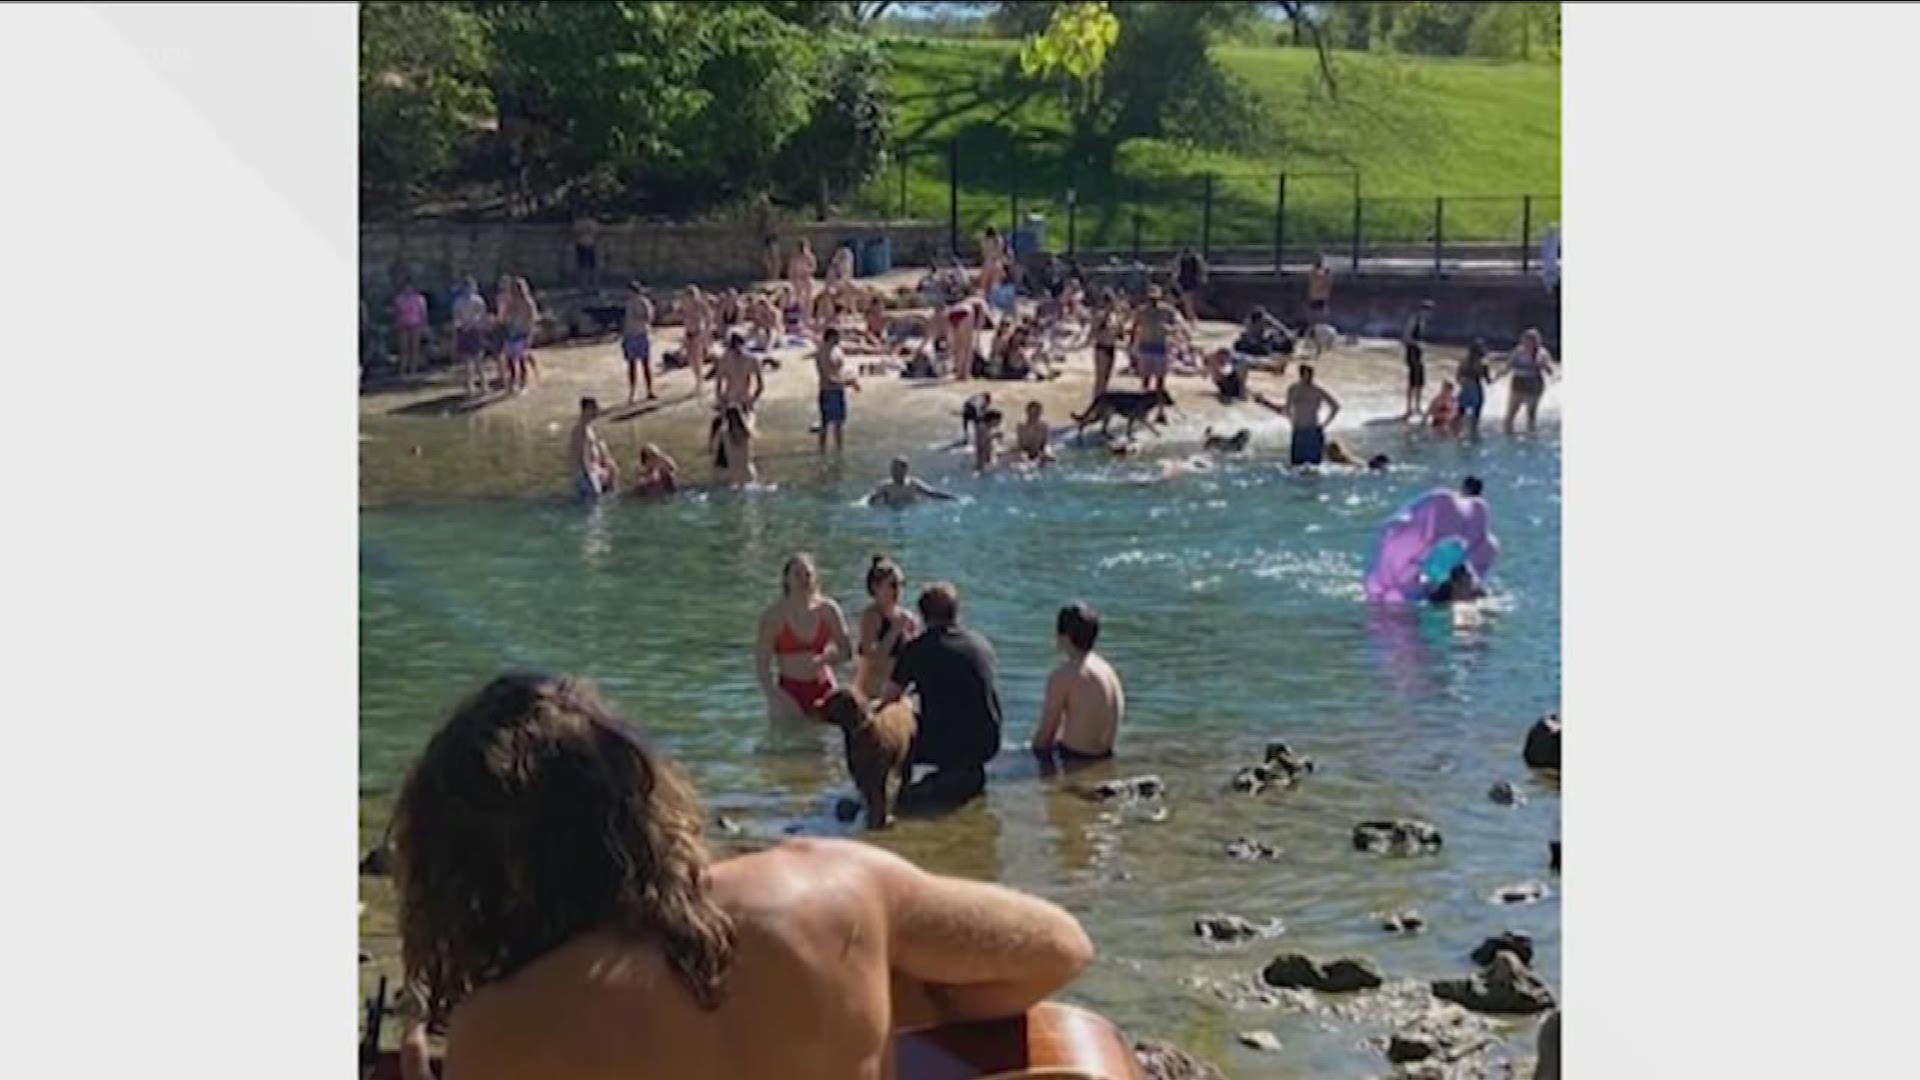 A photo posted on social media showed a crowded Barton Springs Pool – just hours after local officials announced a "stay home" order.